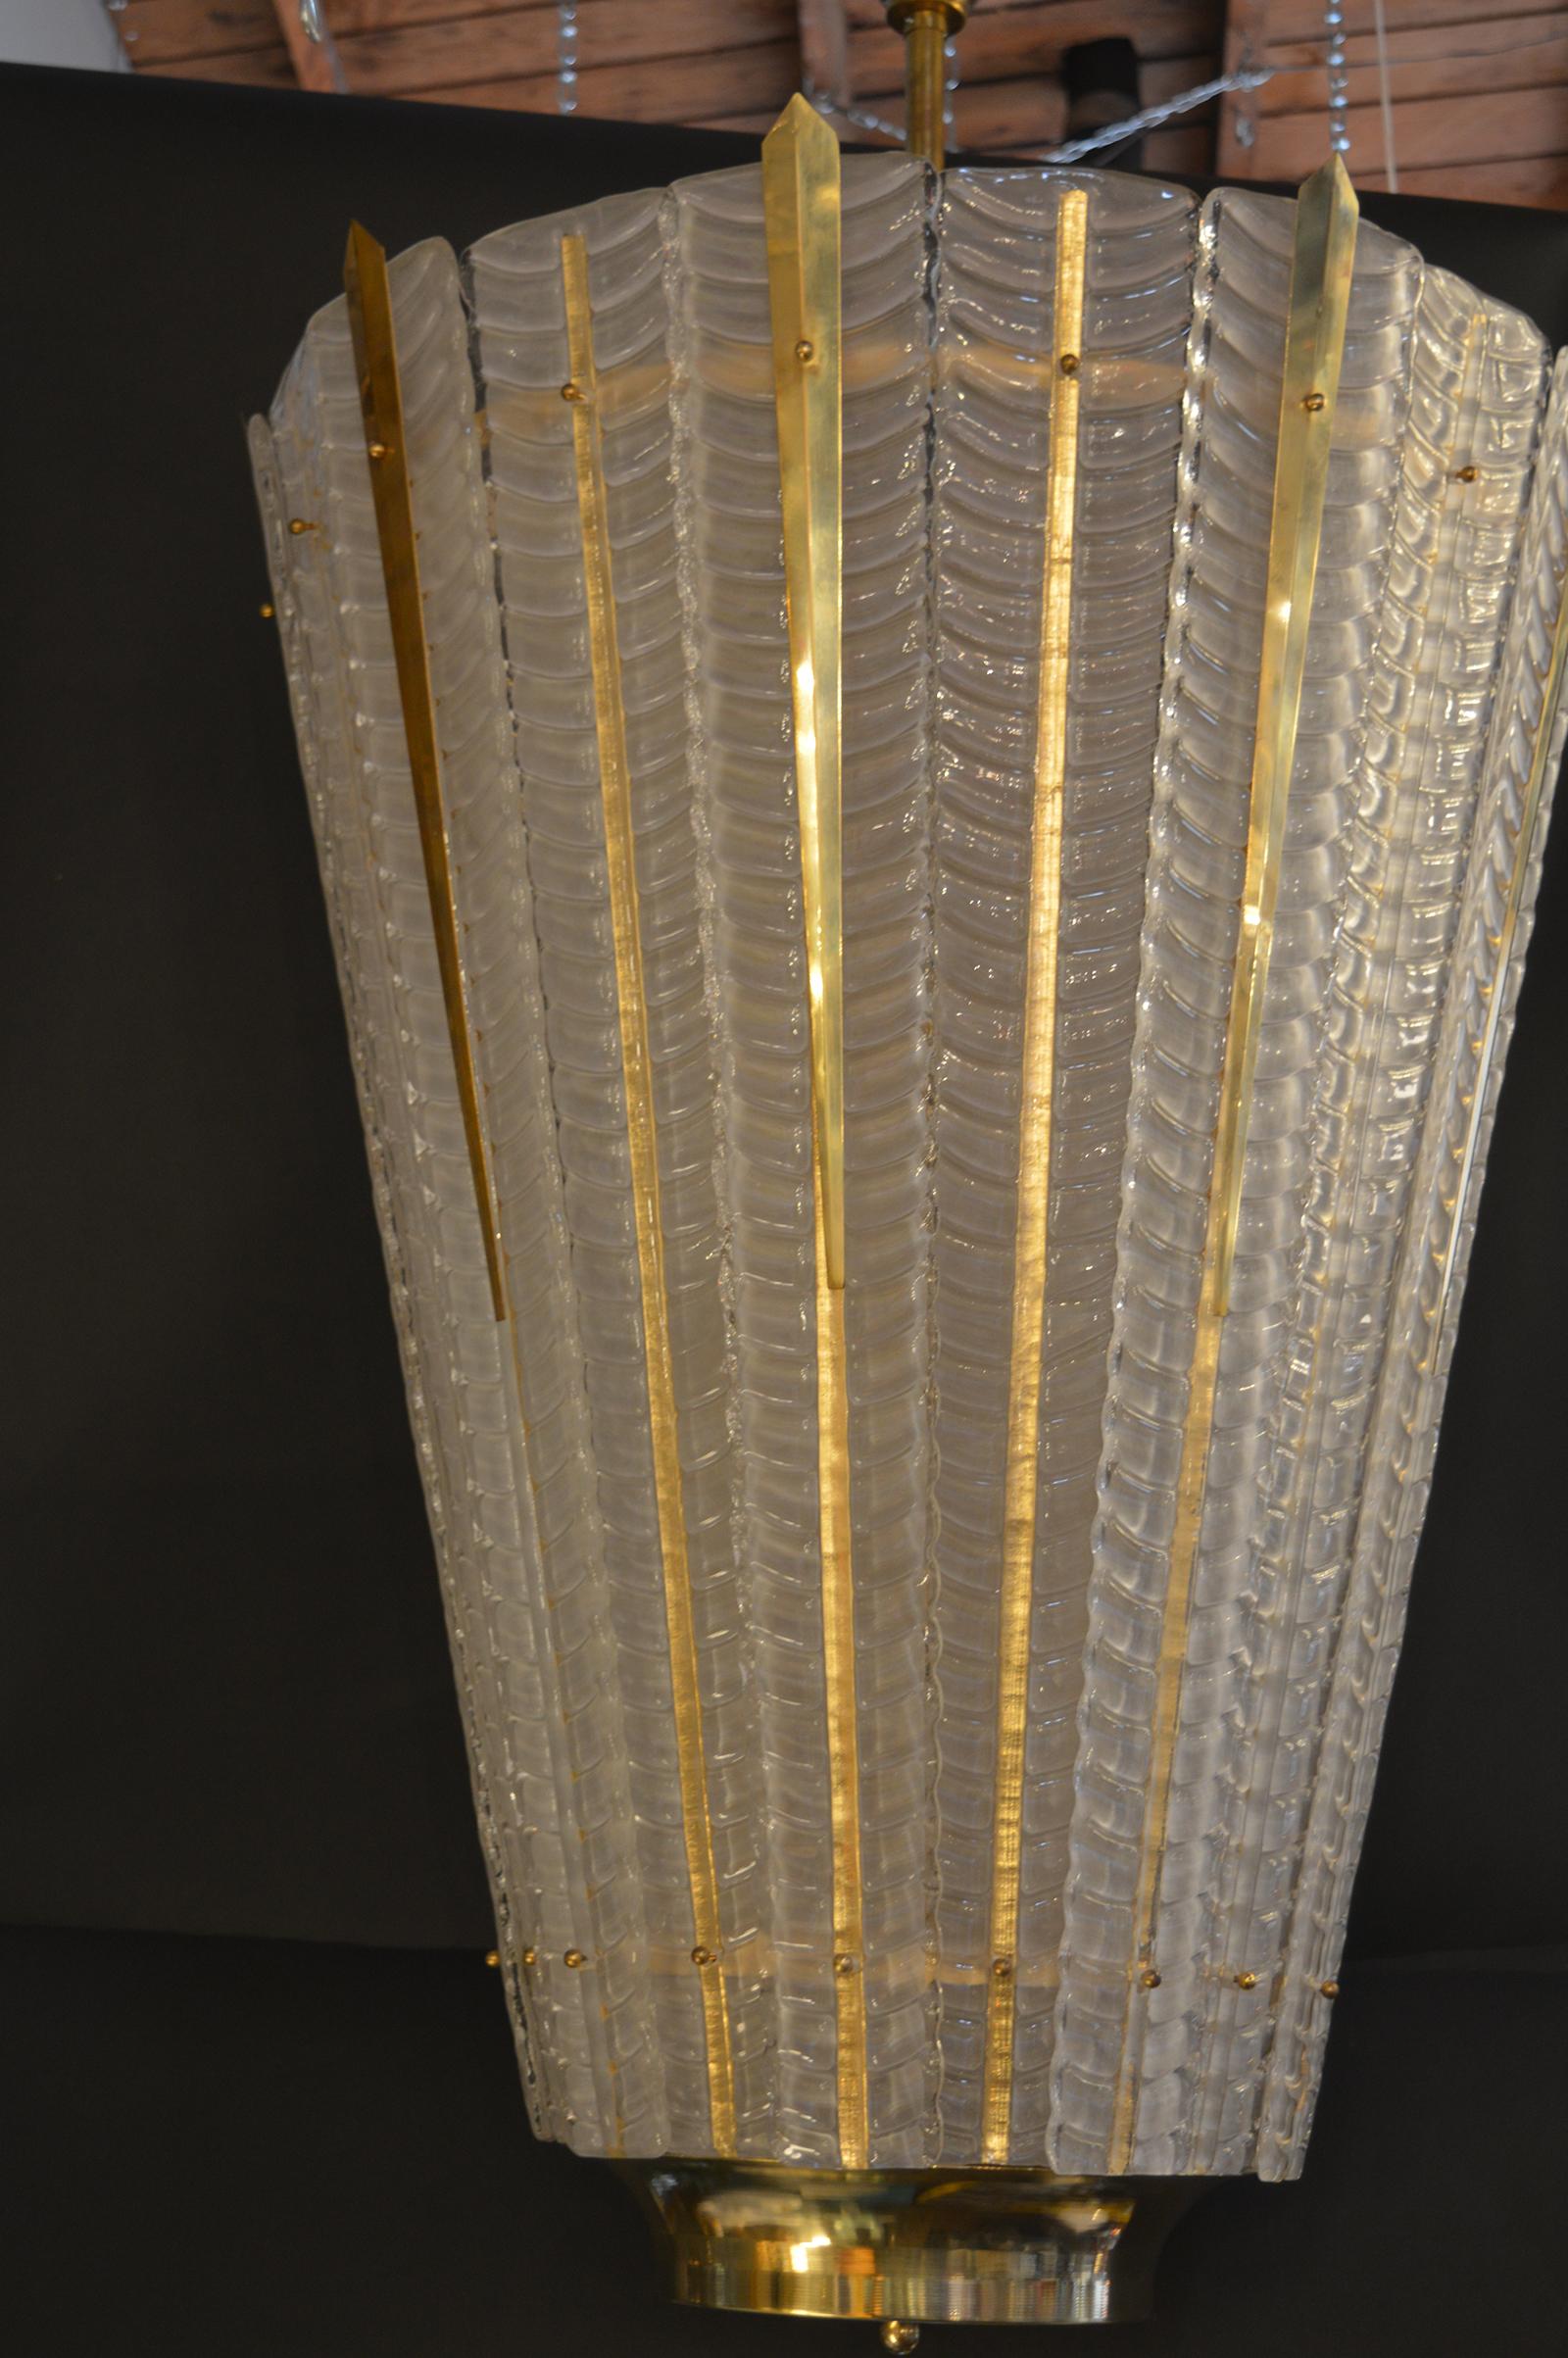 Art Deco Murano lantern with gold detailing in each Murano glass panel. Brass accents.